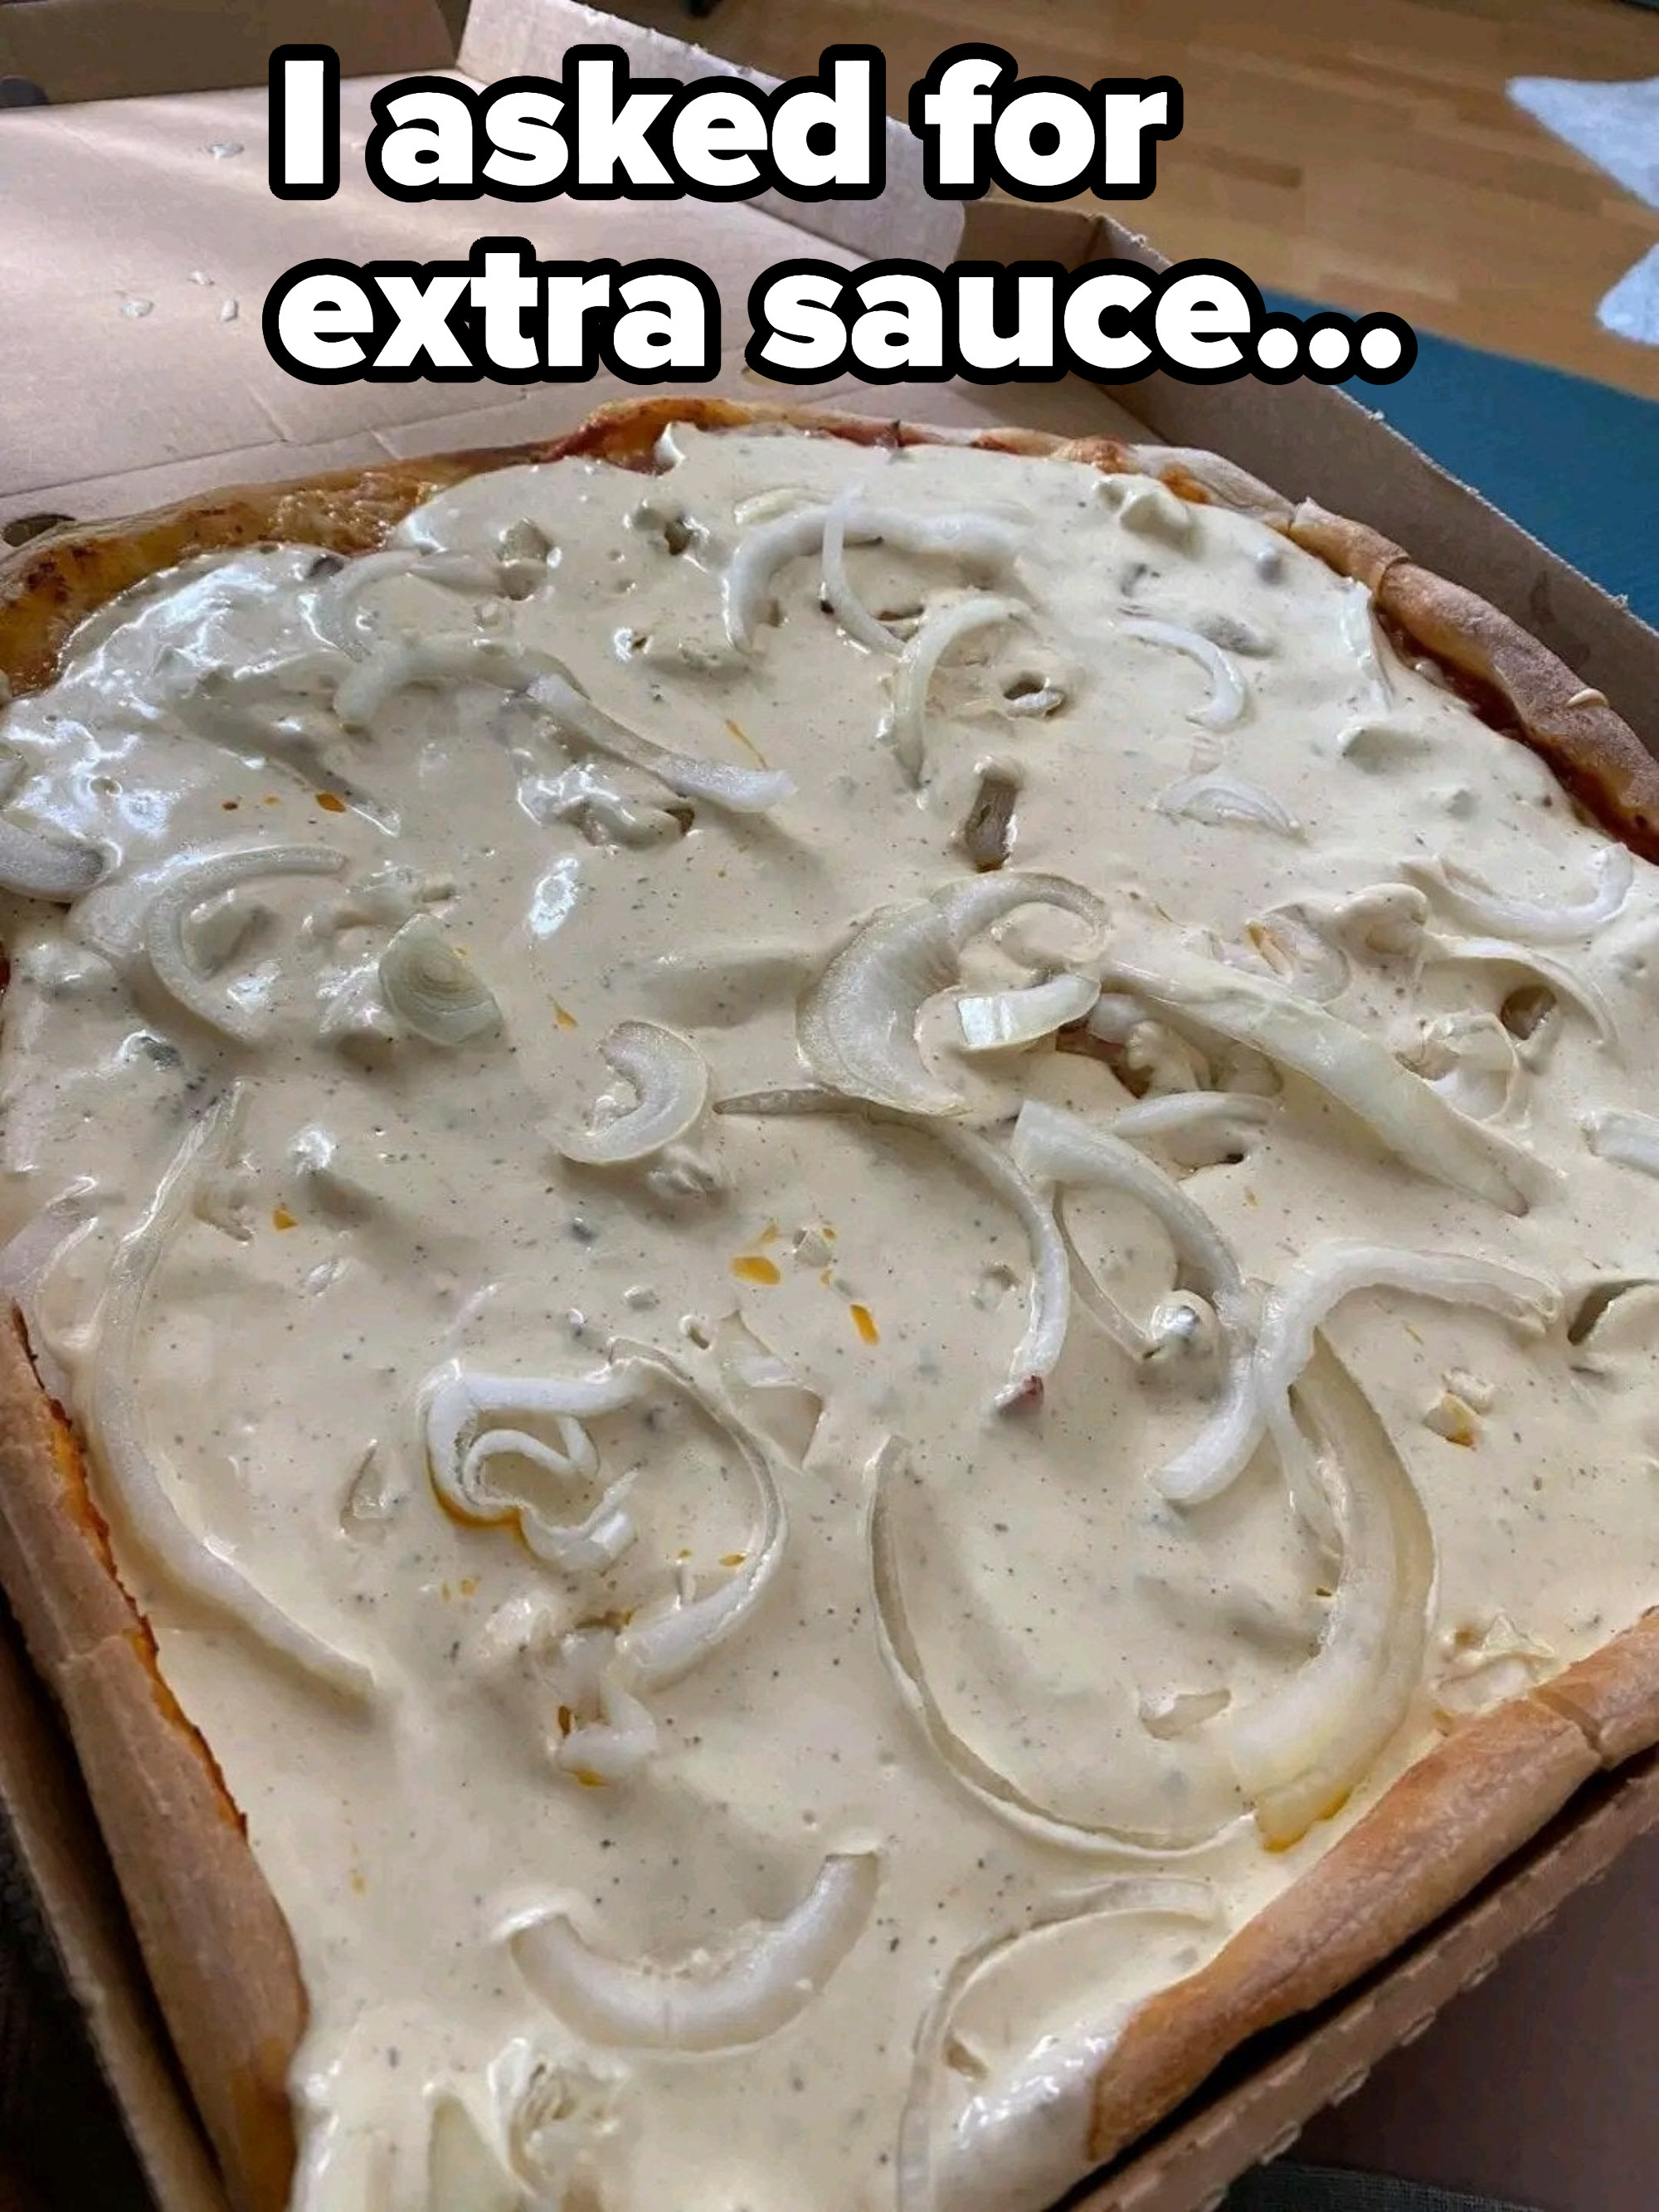 Person has a square pizza smothered with white sauce